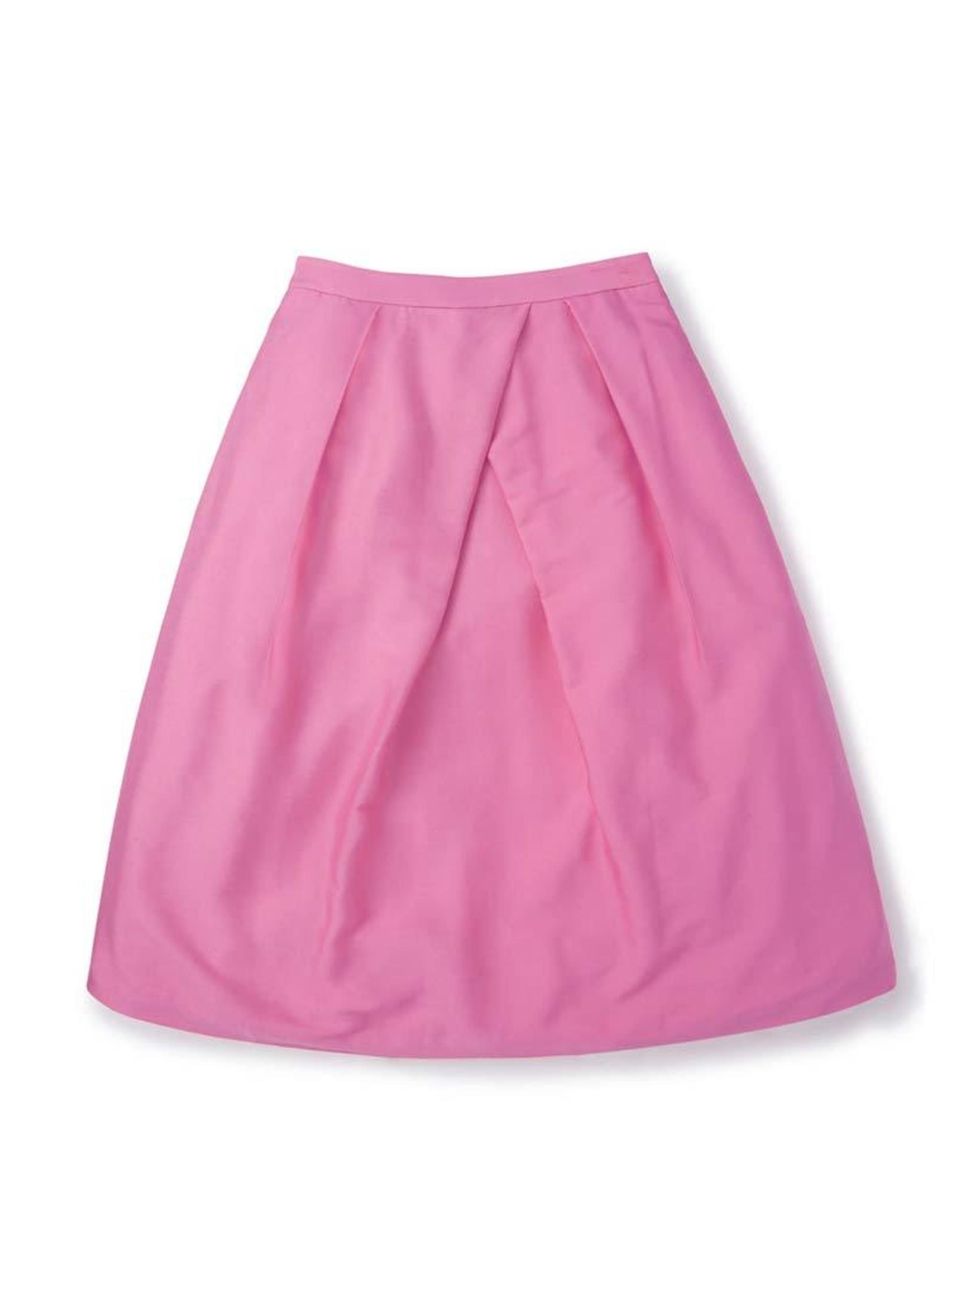 <p>It's a flash of pink for Beauty Assistant Joely Walker.</p>

<p><a href="http://www.boden.co.uk/en-GB/Womens-Skirts/Below-Knee-Skirts/BR042/Womens-Pleated-Full-Skirt.html" target="_blank">Boden</a> skirt, £129</p>